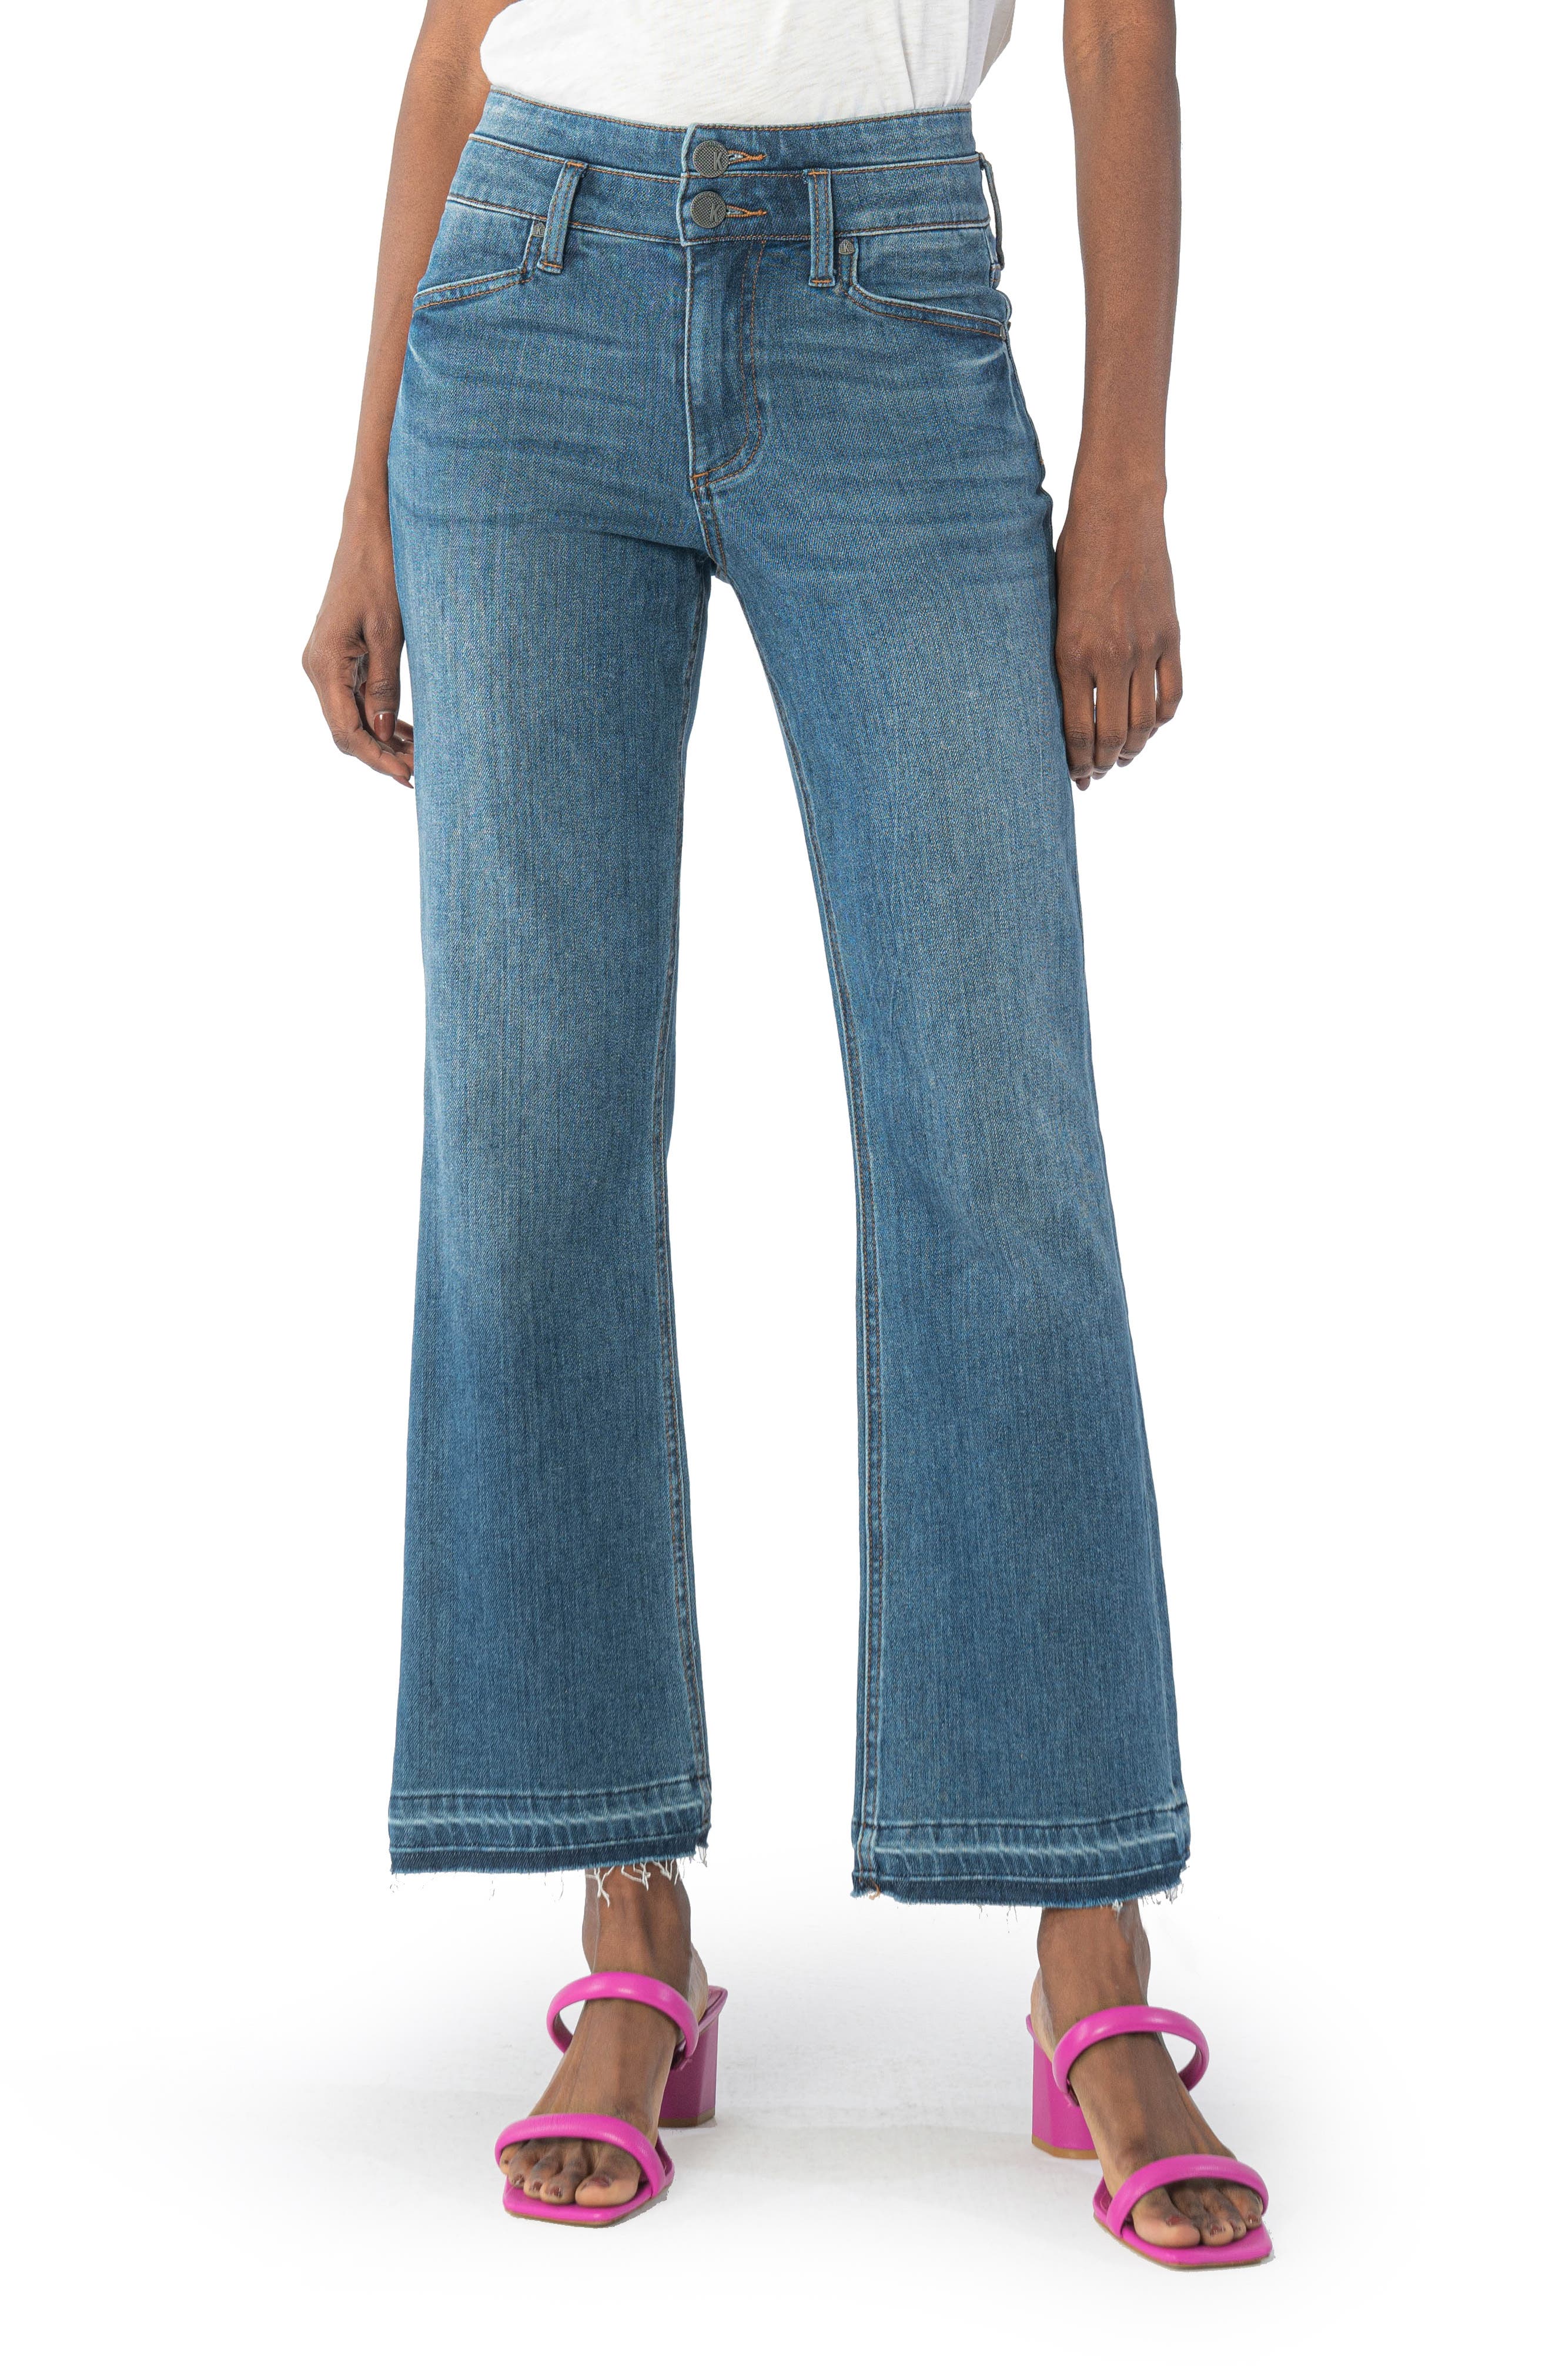 STYLE & CO Dark Wash Denim Flare Jeans CHOOSE YOUR SIZE High-Rise